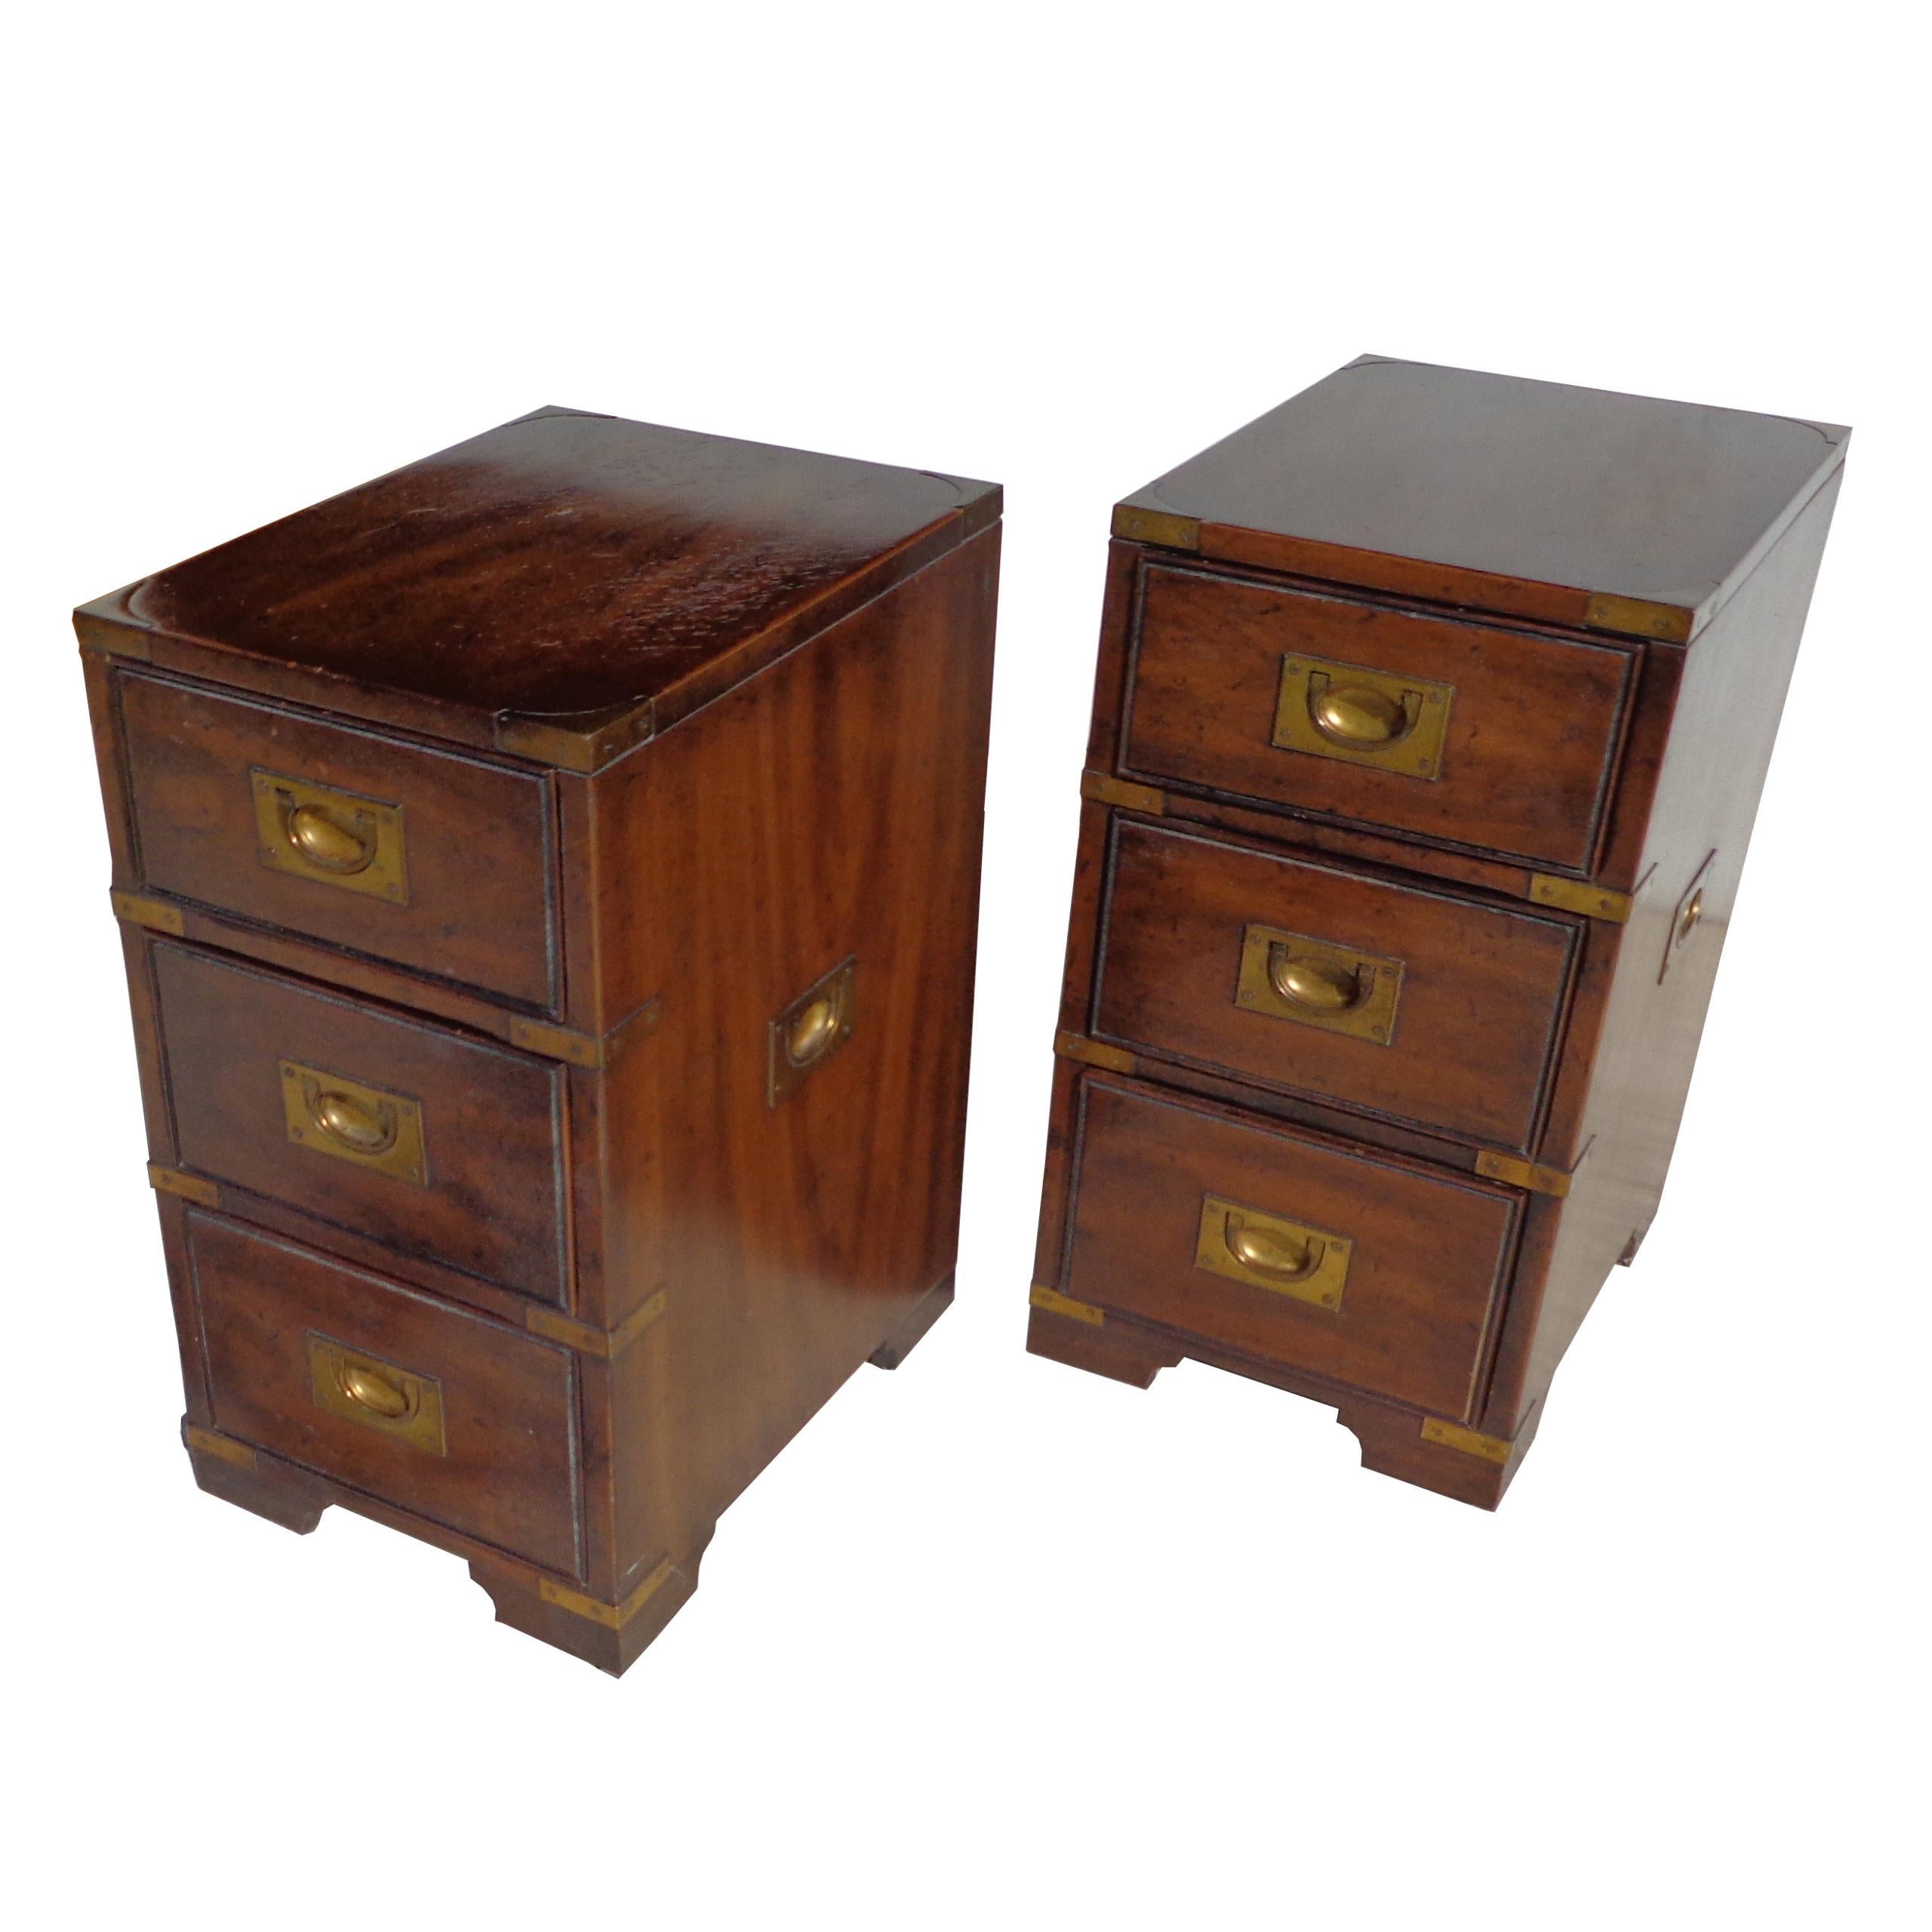 Pair of Drexel campaign cabinets nightstands

Campaign nightstands with recessed brass pulls and accents. Each with three dovetailed drawers. 

